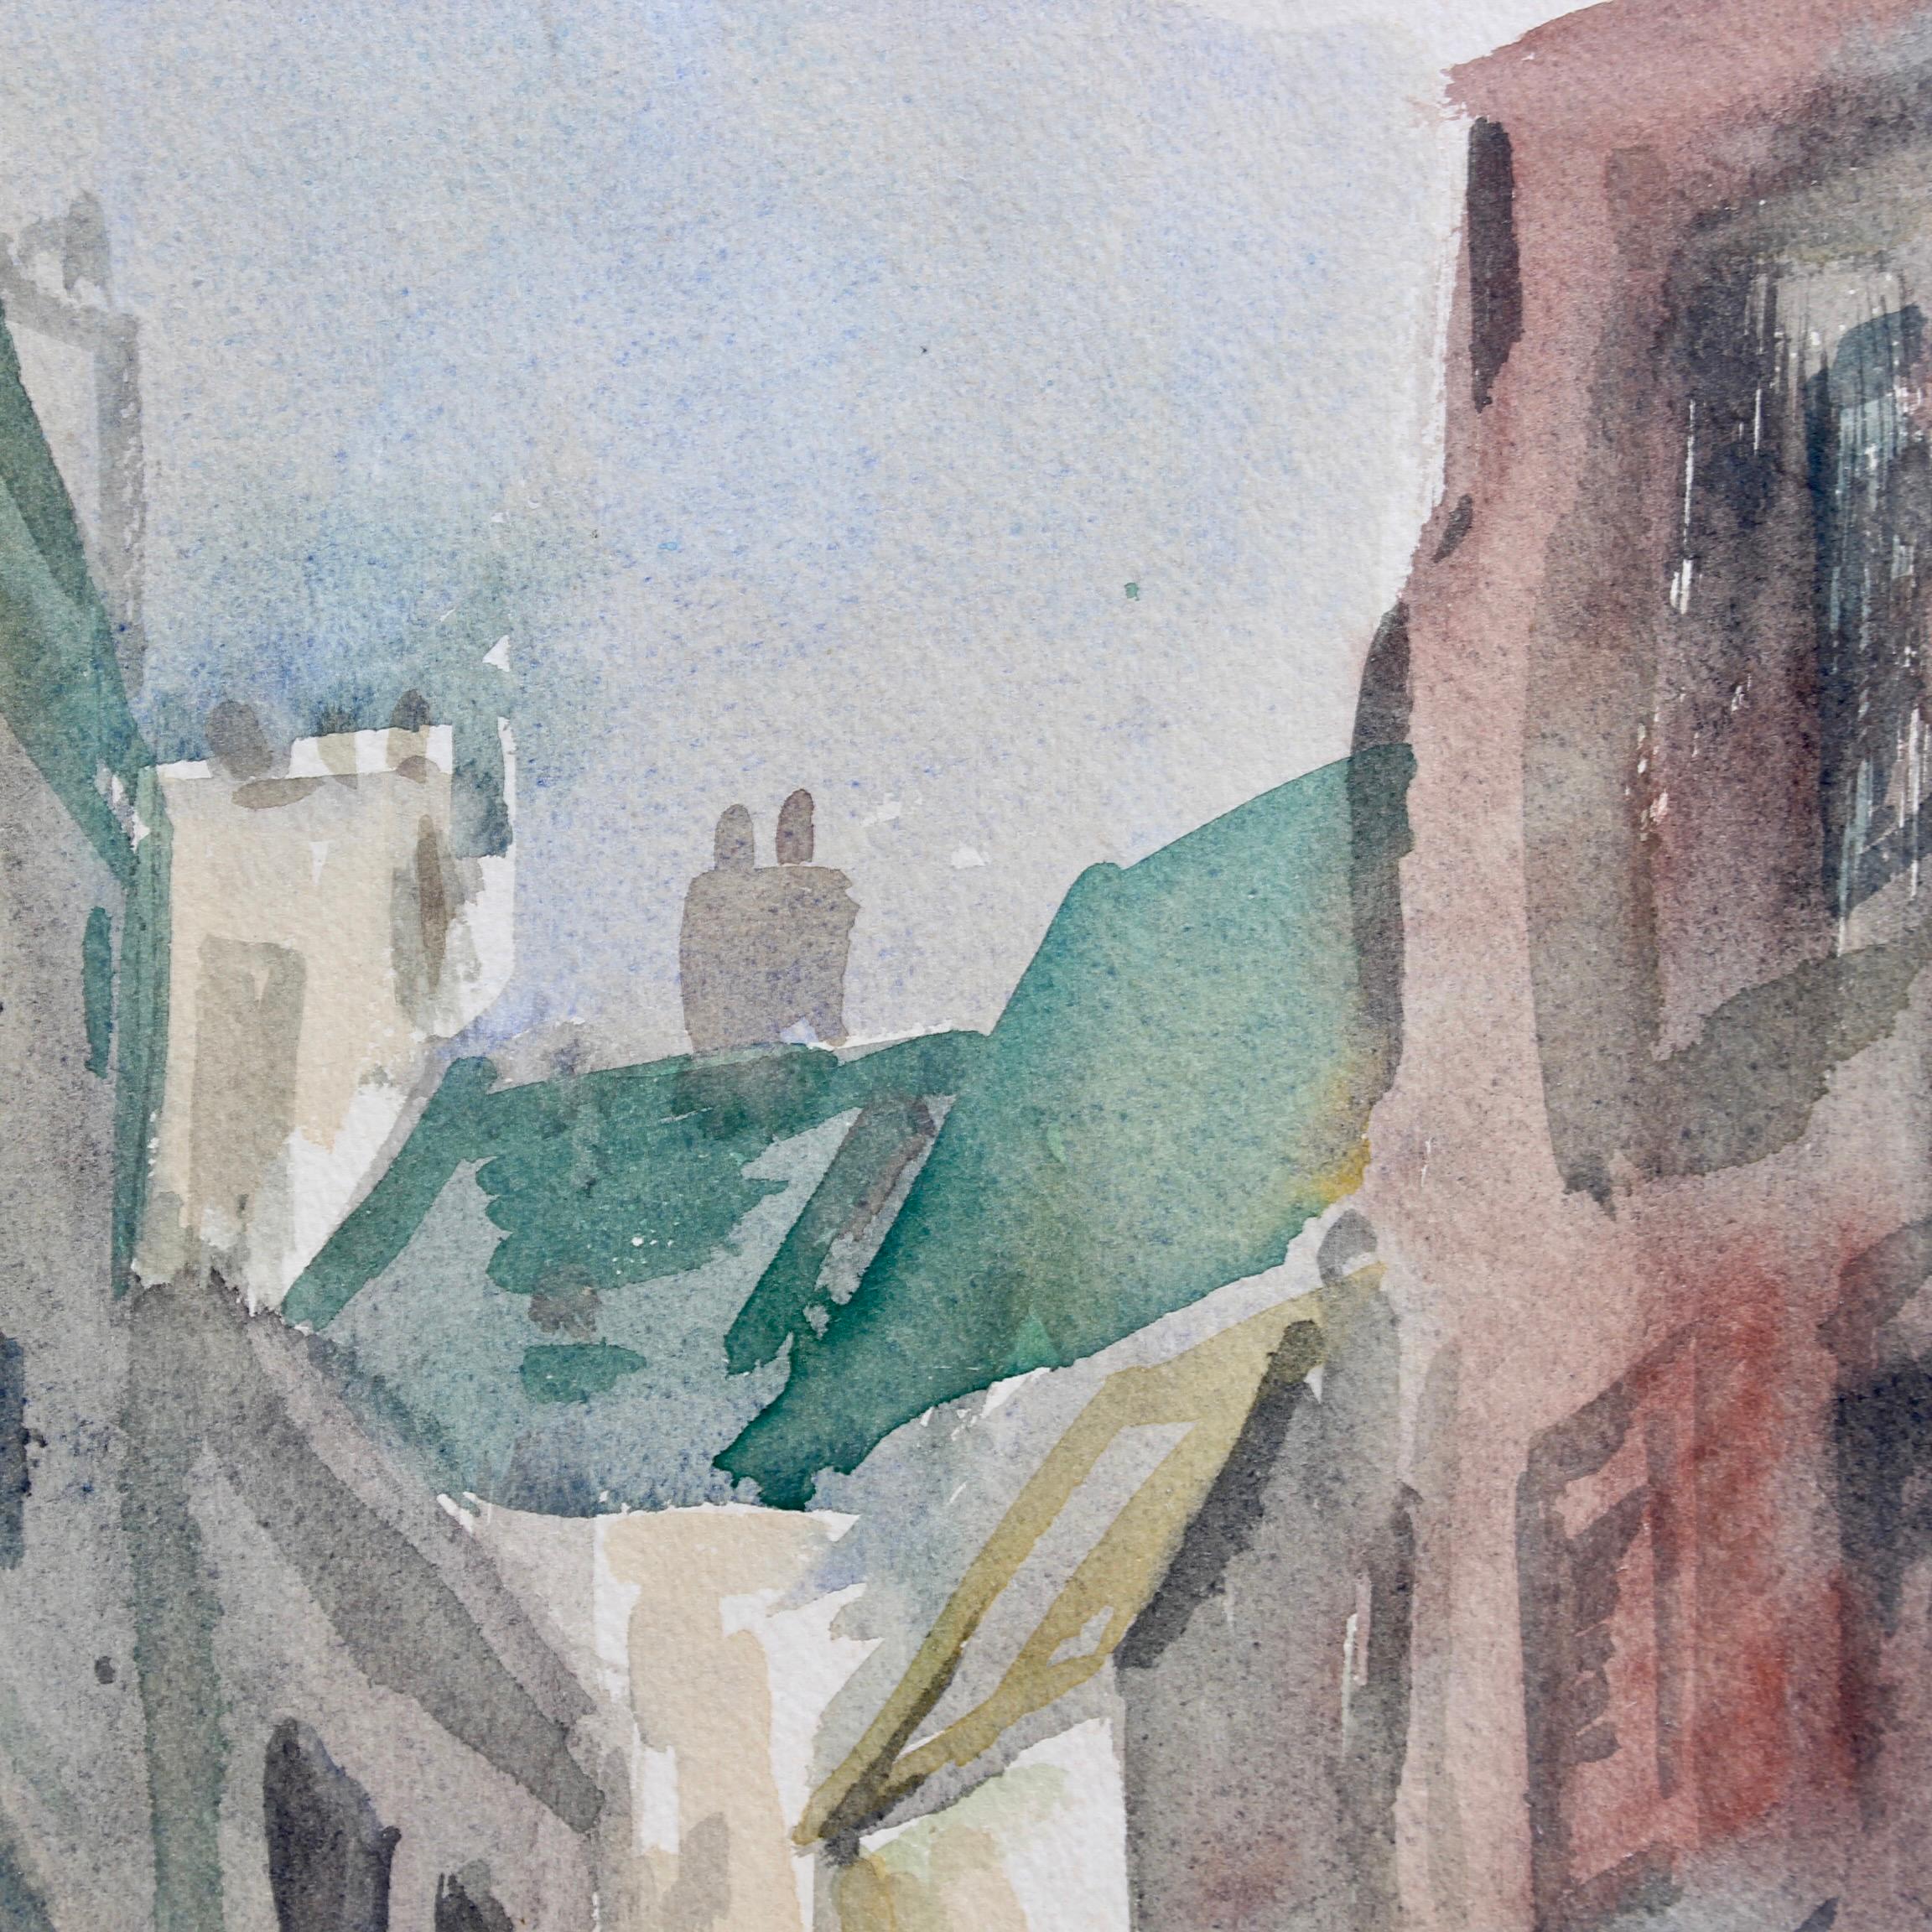 'Parisian Street Scene', watercolour on art paper, by Roland DuBuc (circa 1970s). This artwork is a delightful depiction of a Parisian street which scales the hill to the neighbourhood of Montmartre, the home of the basilica of Sacré-Cœur. DuBuc's